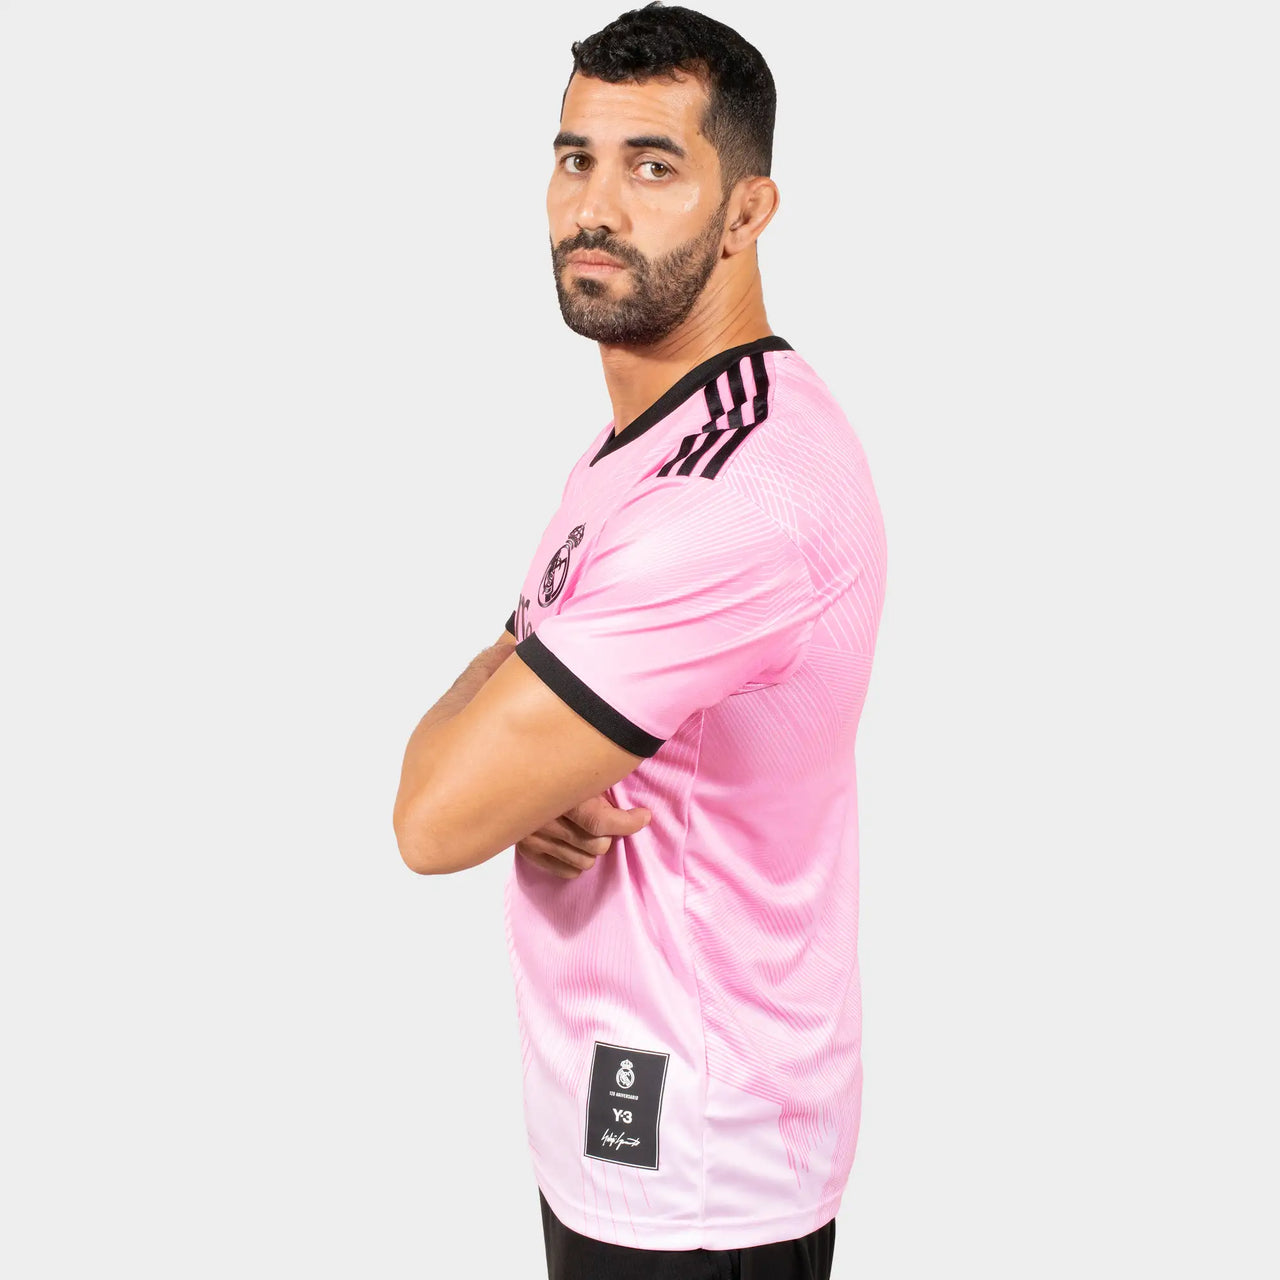 Maillot Real Madrid Y3 Édition Spéciale Rose Homme